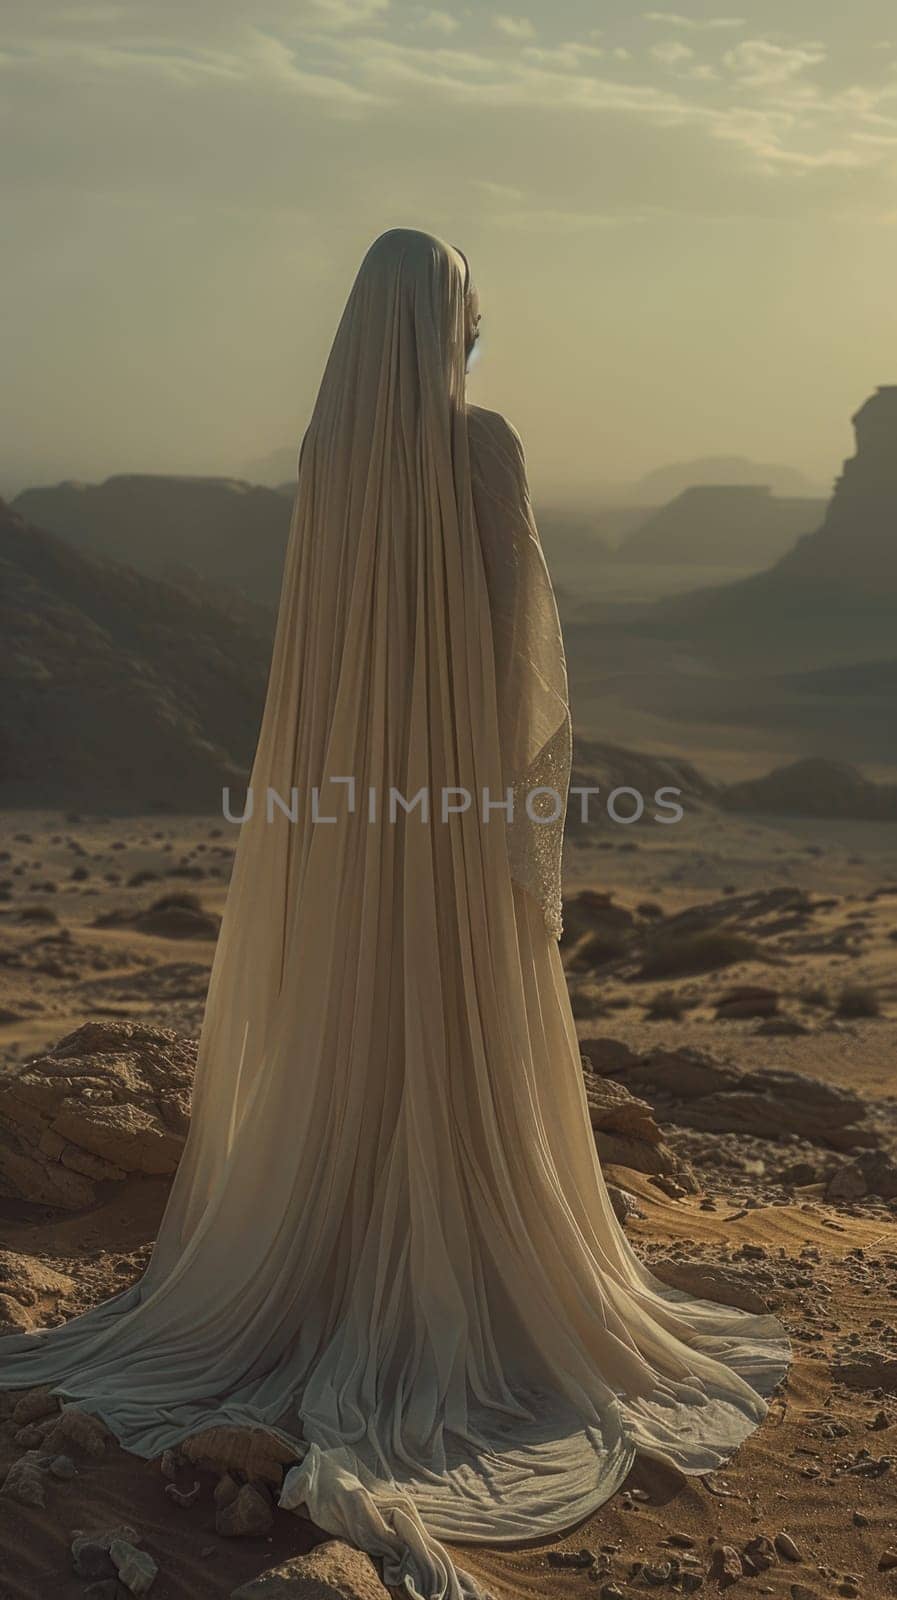 A woman with long hair standing in the desert under the clear blue sky.